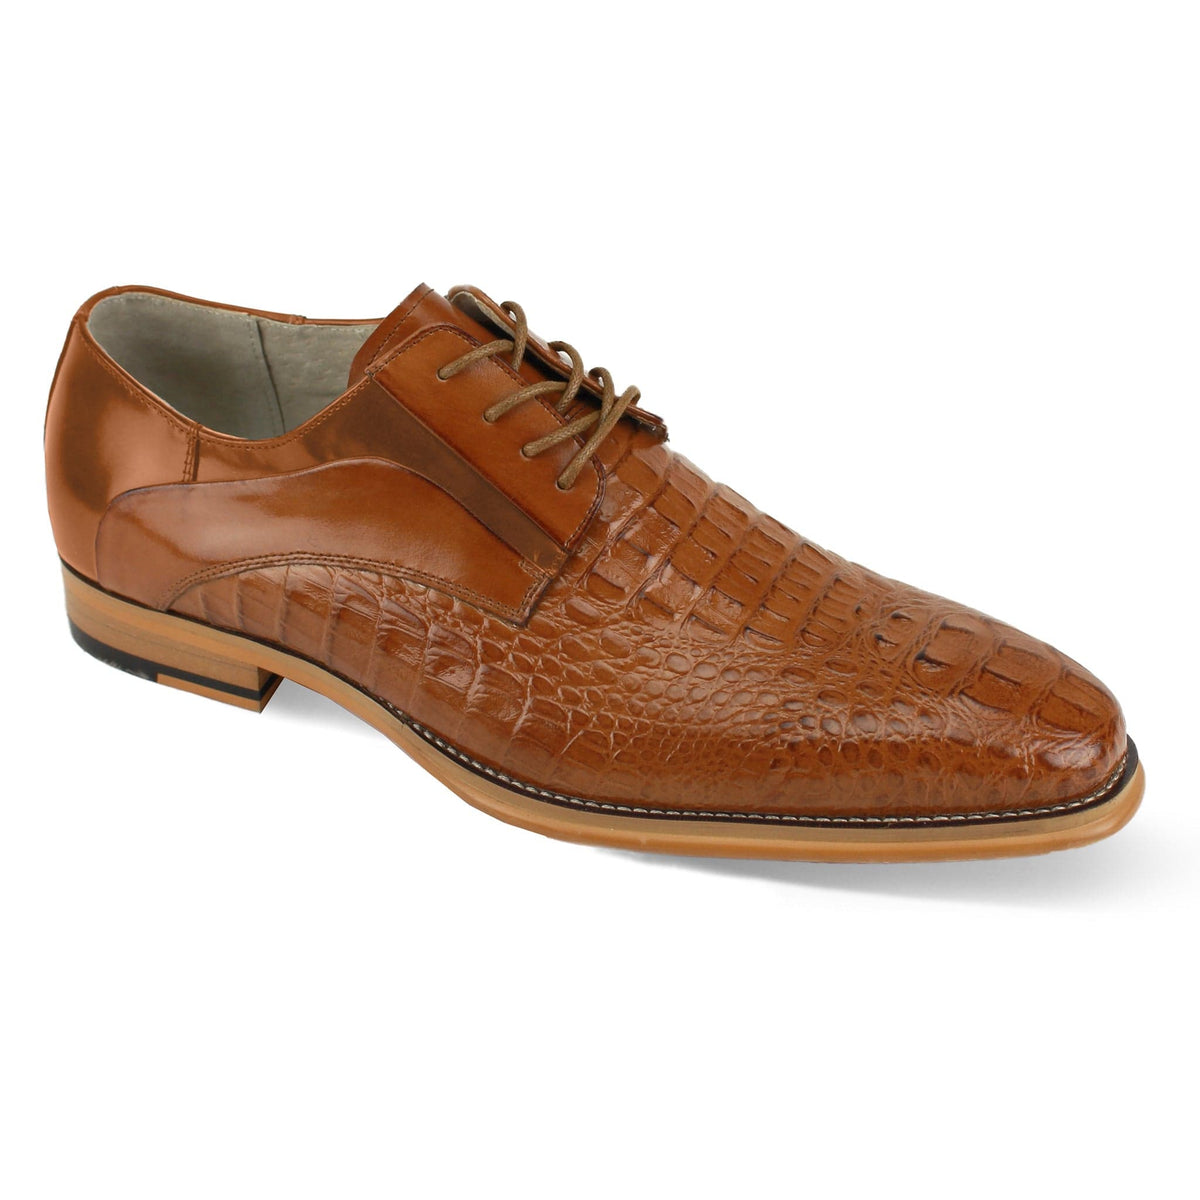 GIOVANNI LEATHER SHOES FT TAN / 7 GIOVANNI LEATHER SHOES-MASON-TAN